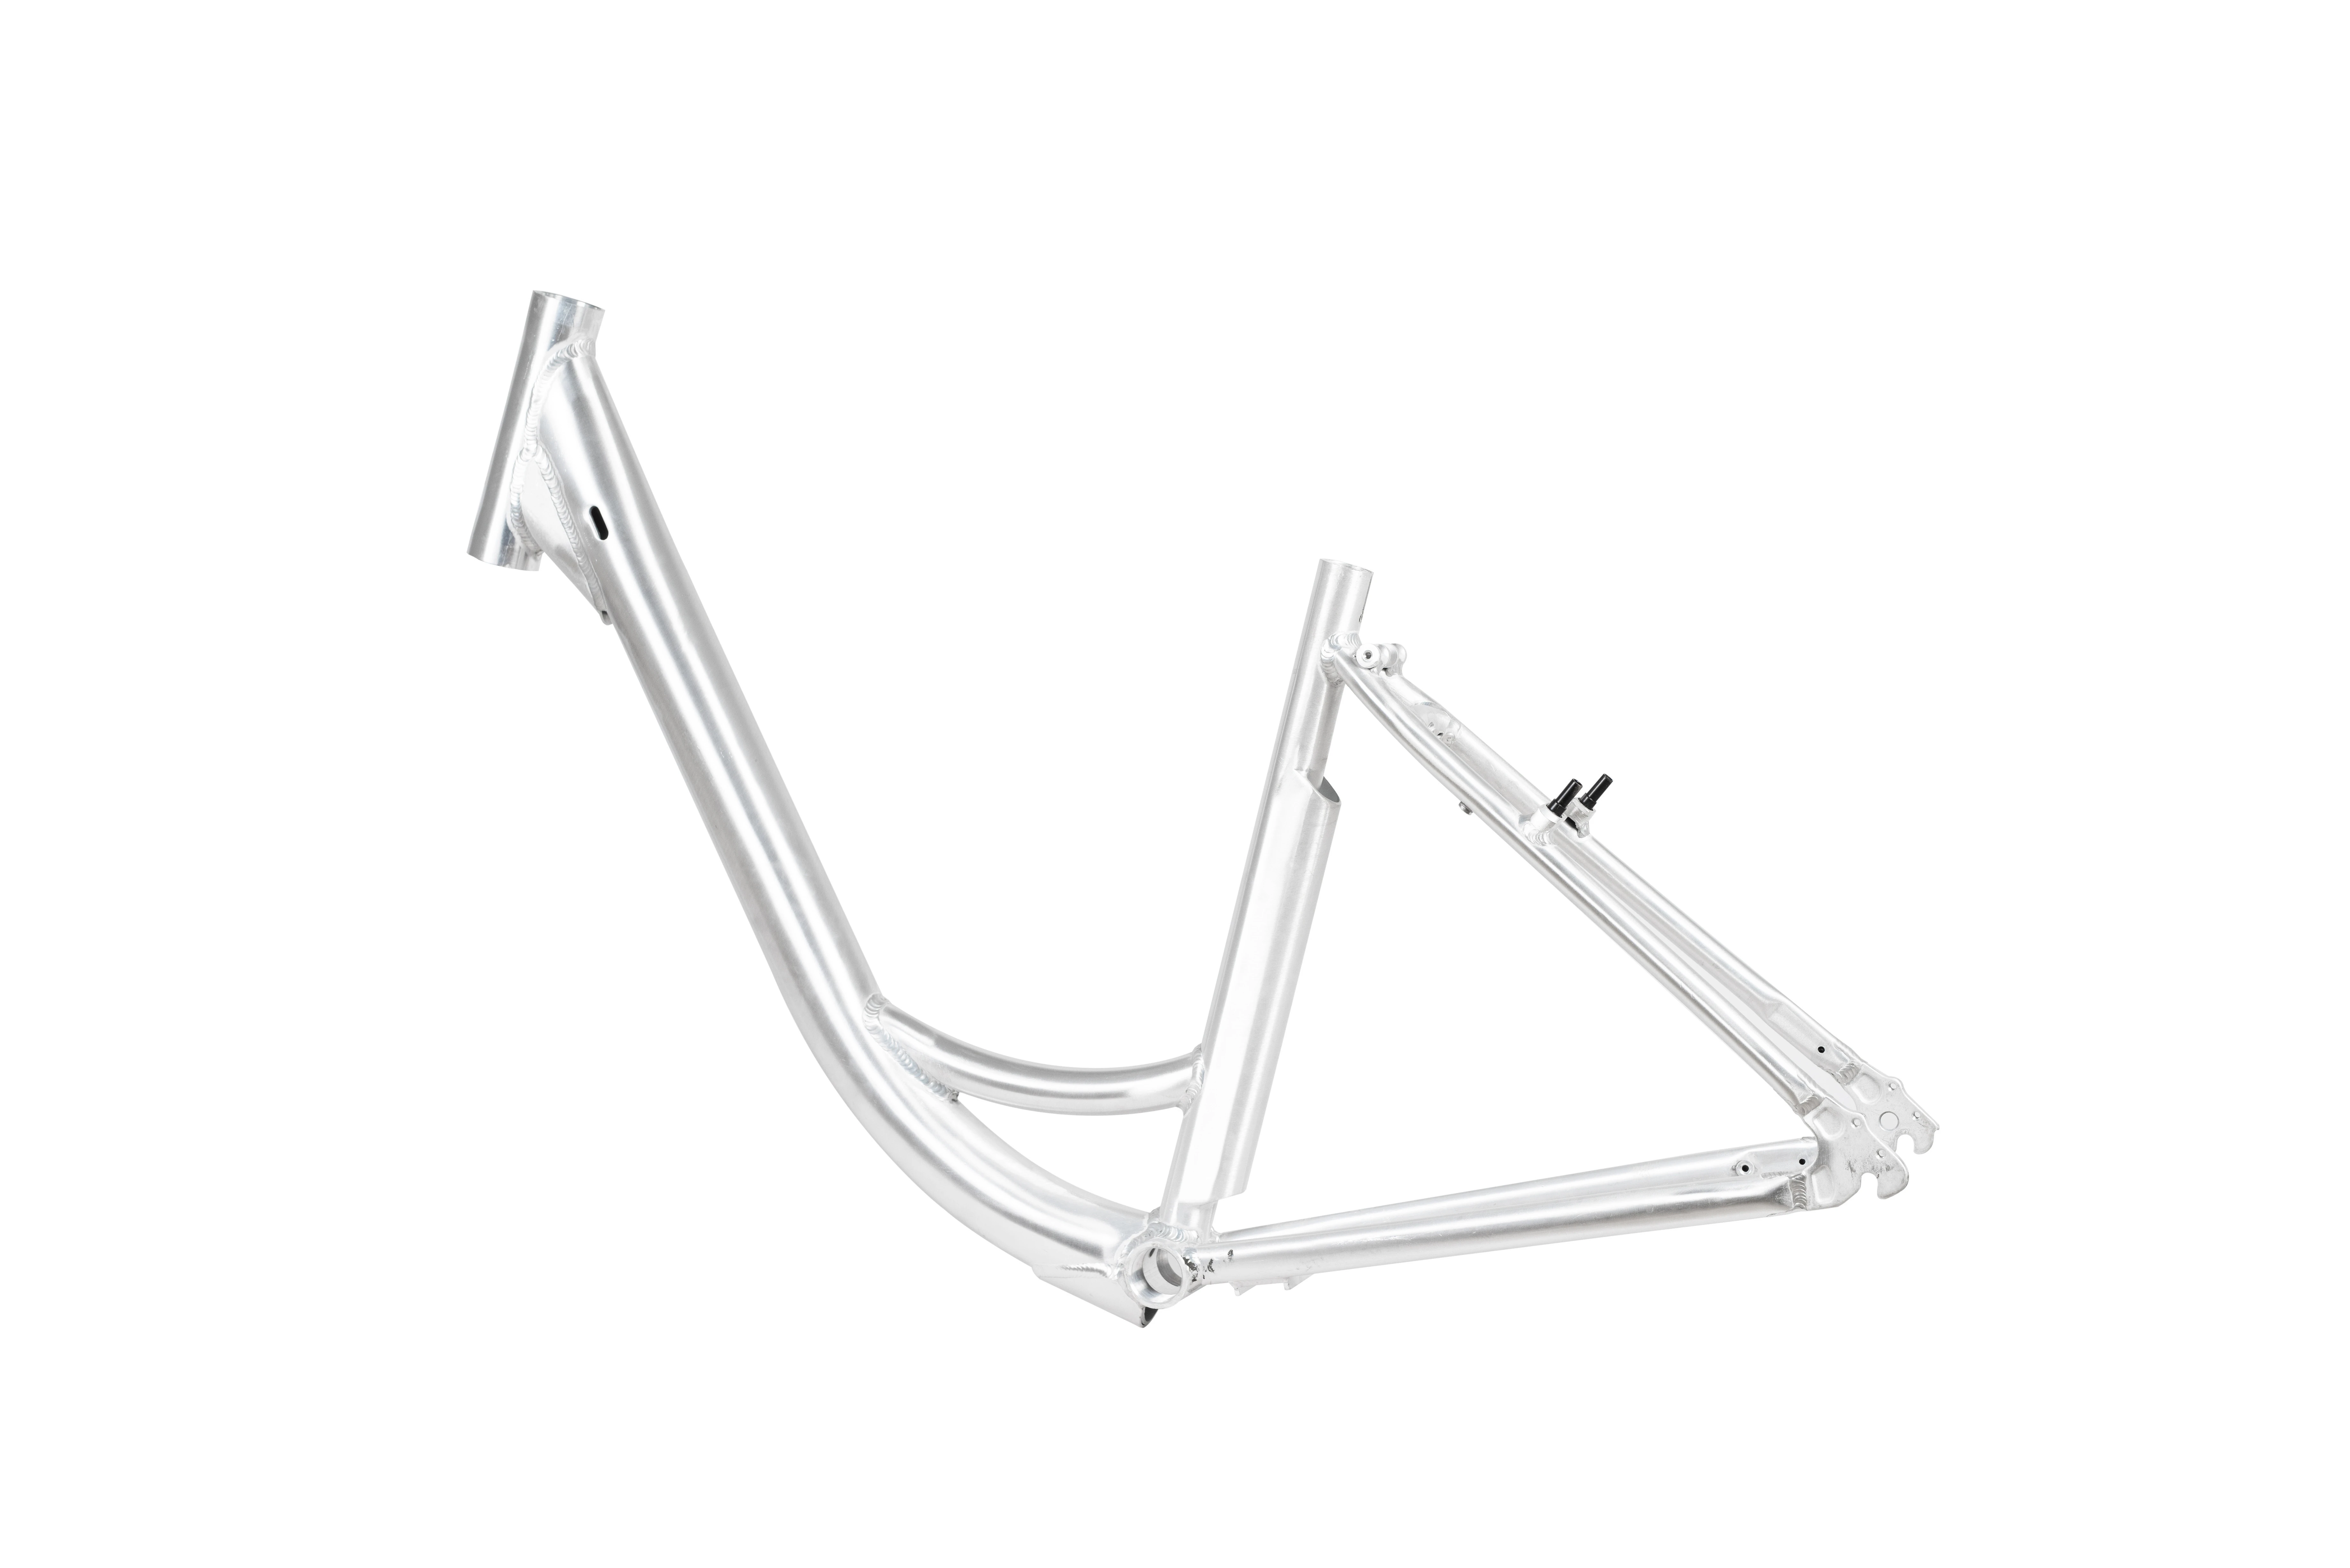 2021 new OEM factory direct 26inch aluminium alloy electric bicycle frame city bike frame